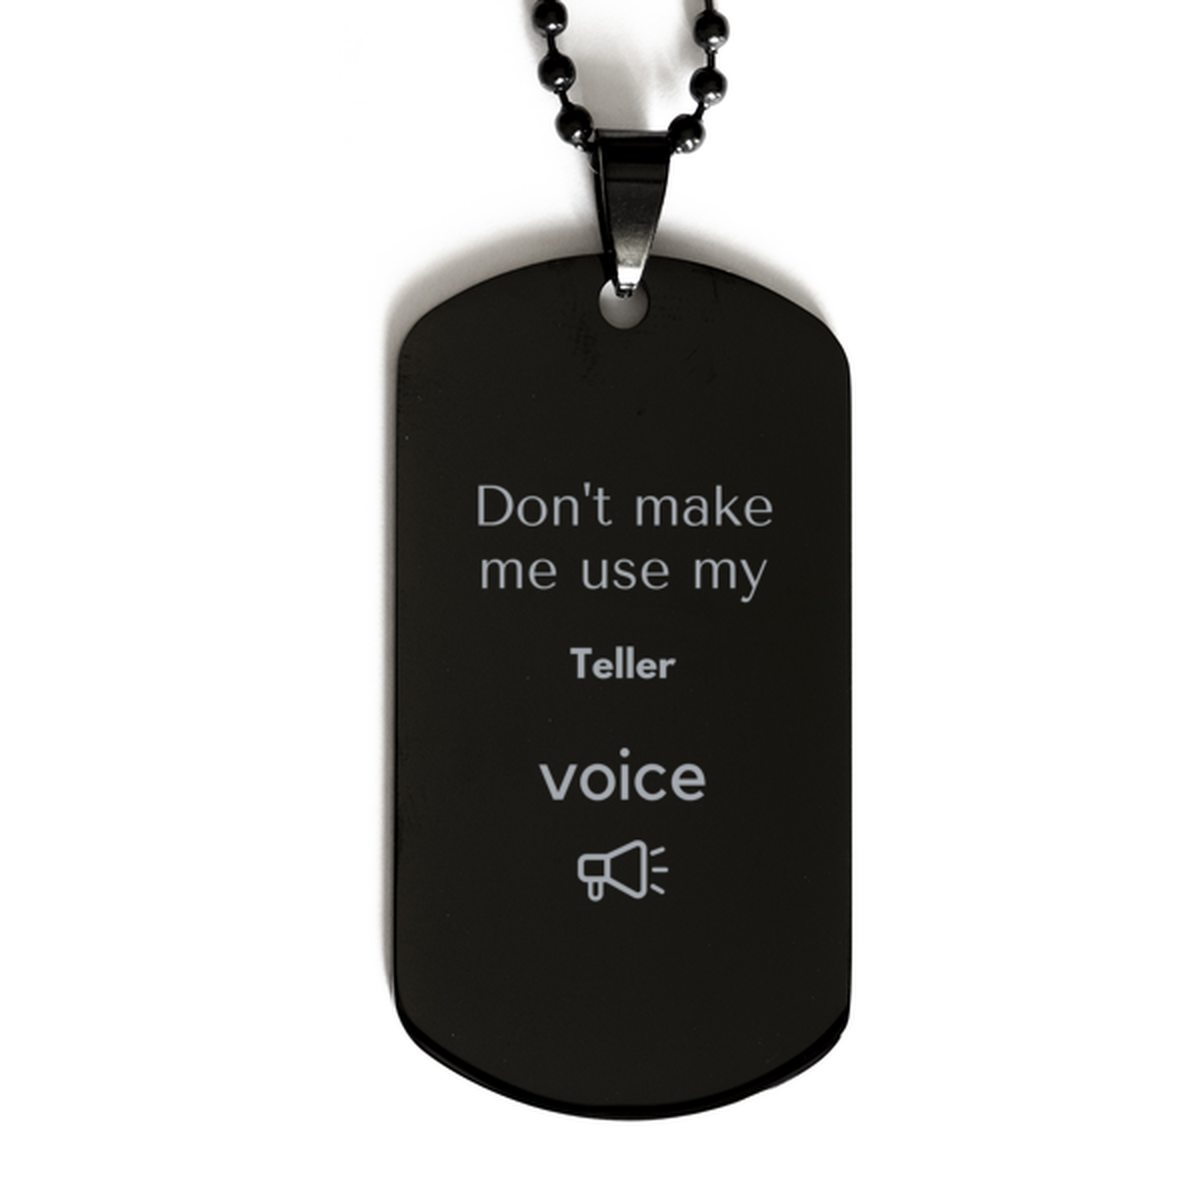 Don't make me use my Teller voice, Sarcasm Teller Gifts, Christmas Teller Black Dog Tag Birthday Unique Gifts For Teller Coworkers, Men, Women, Colleague, Friends